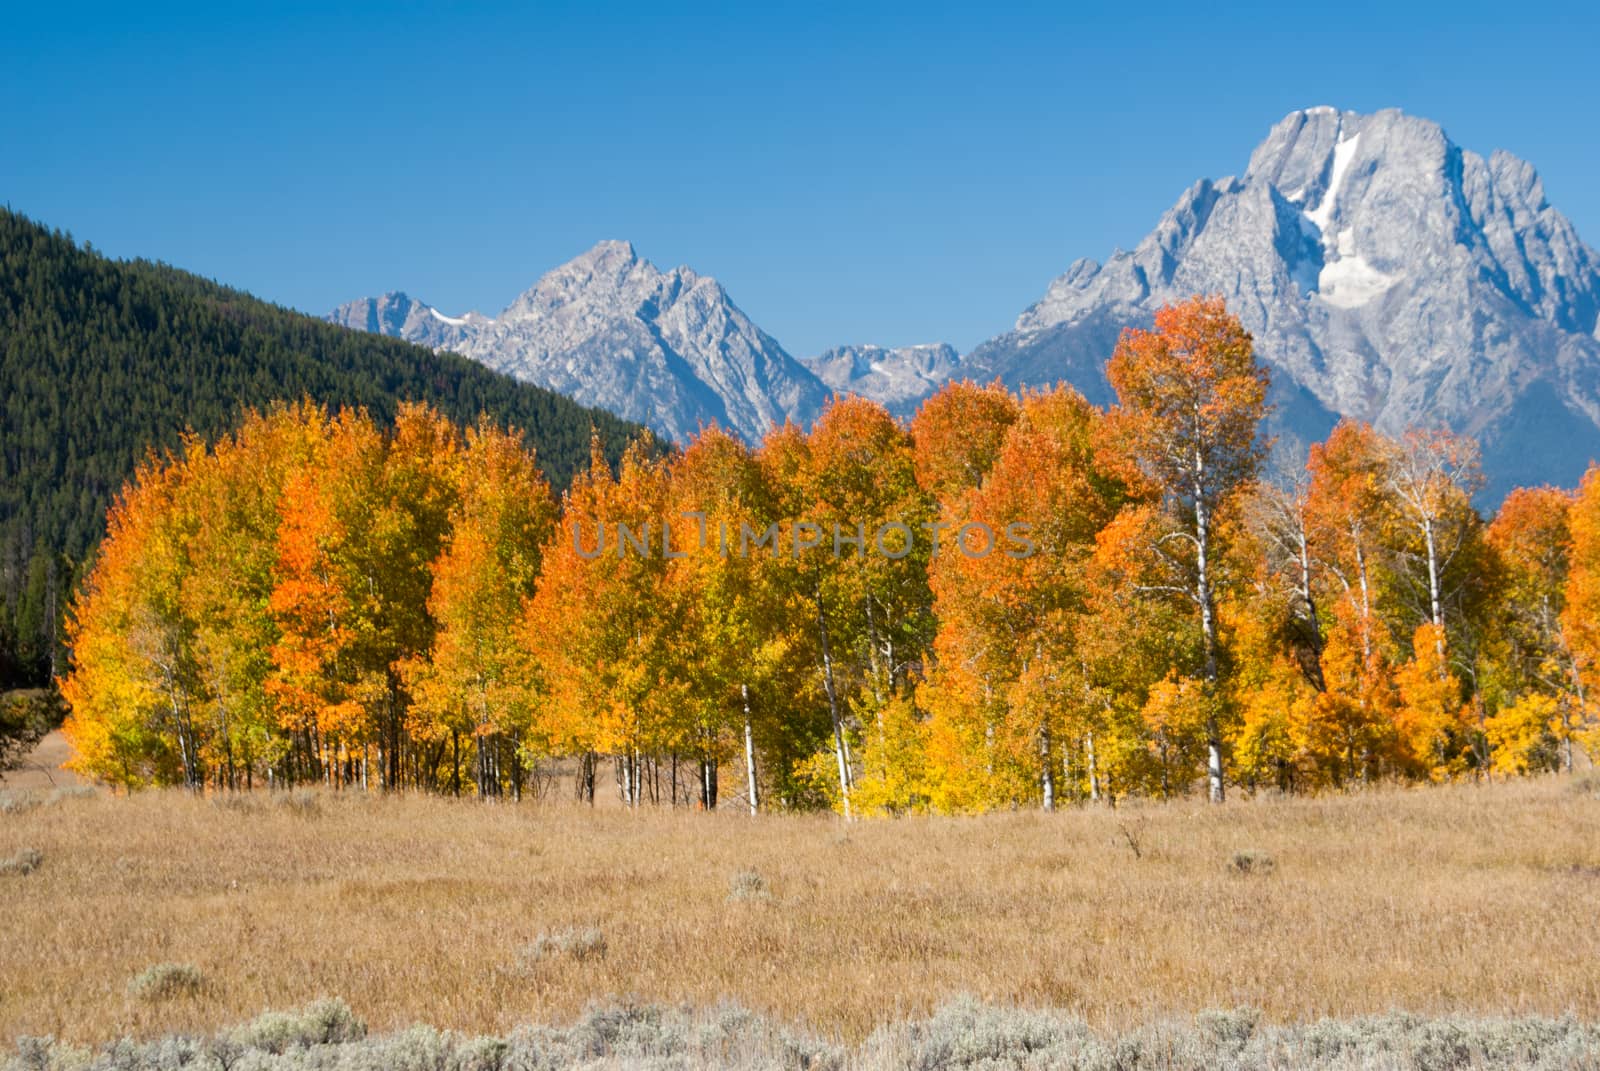 Autumn in Grand Tetons National Park